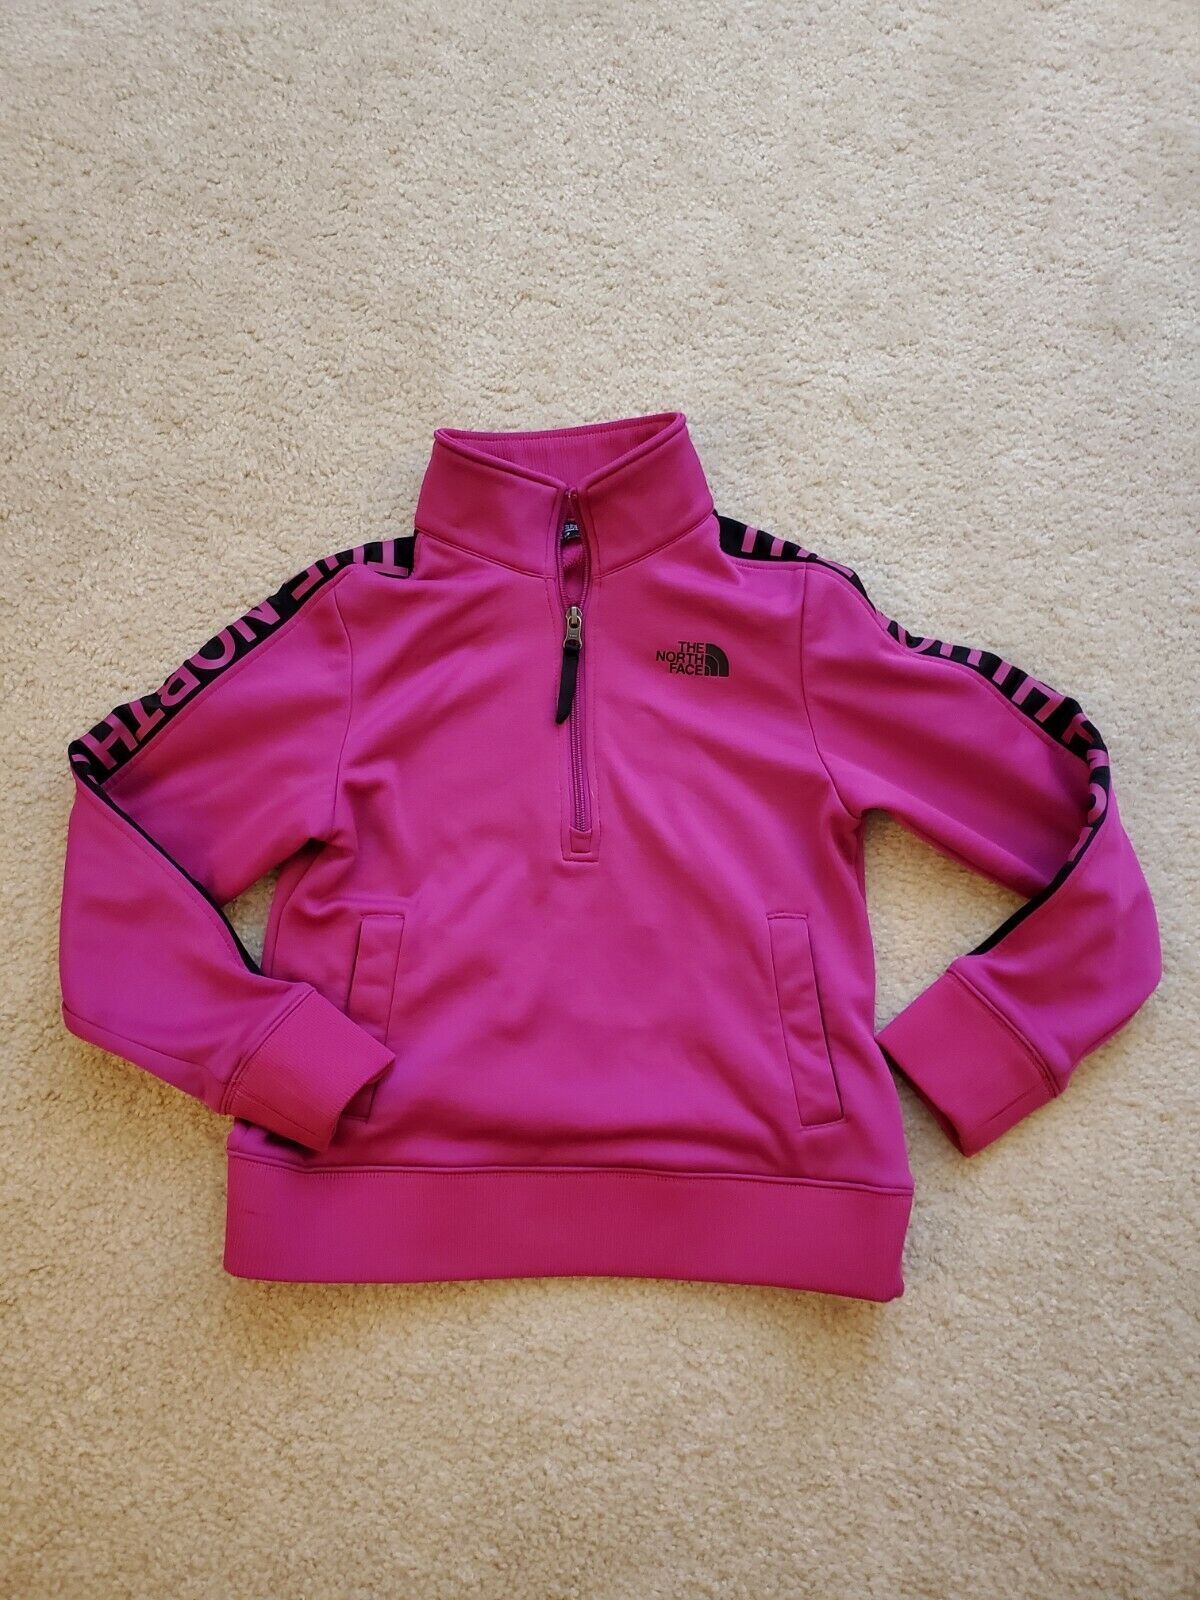 Girls Northface Pullover Size Small 7/8